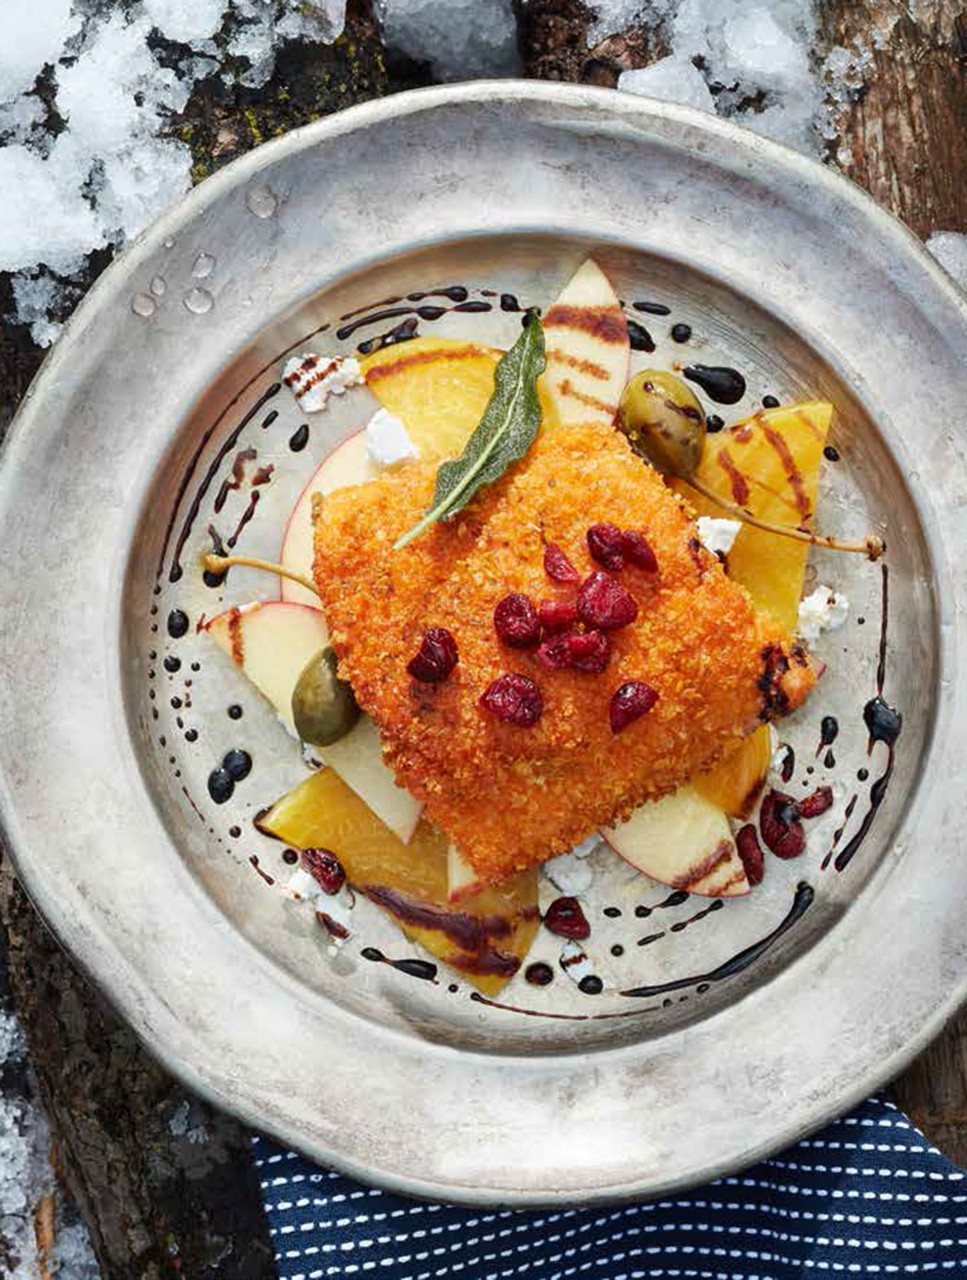 Cornflake-Crusted Arctic Char Fillet on an Apple Beet Salad